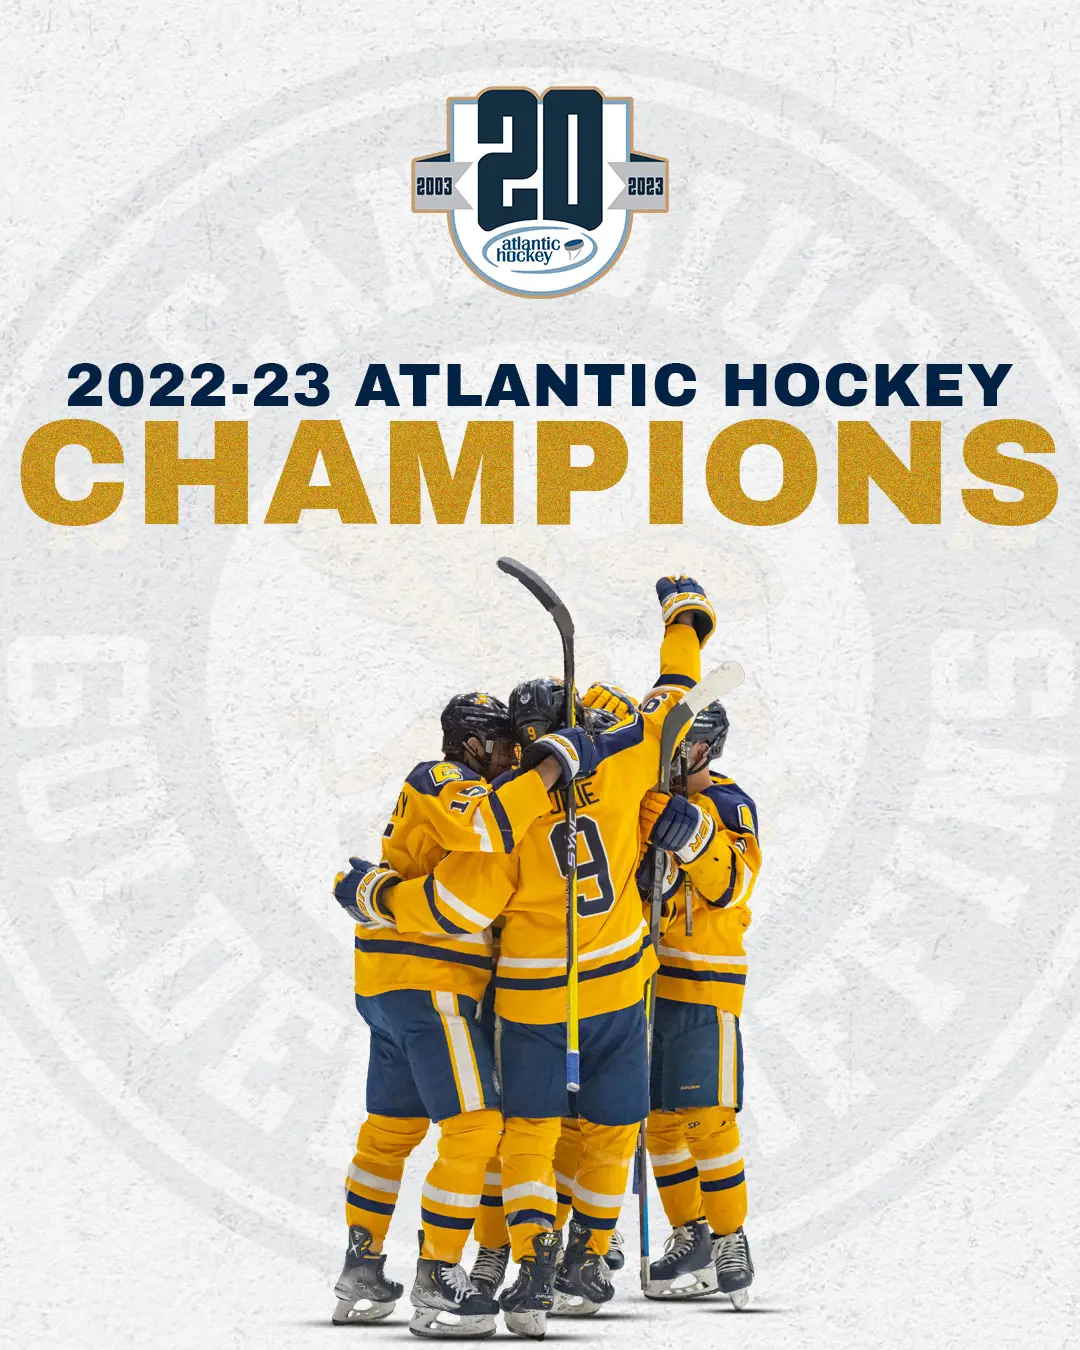 The griffins from Canisius College became the Division I Atlantic division Champions in 2023